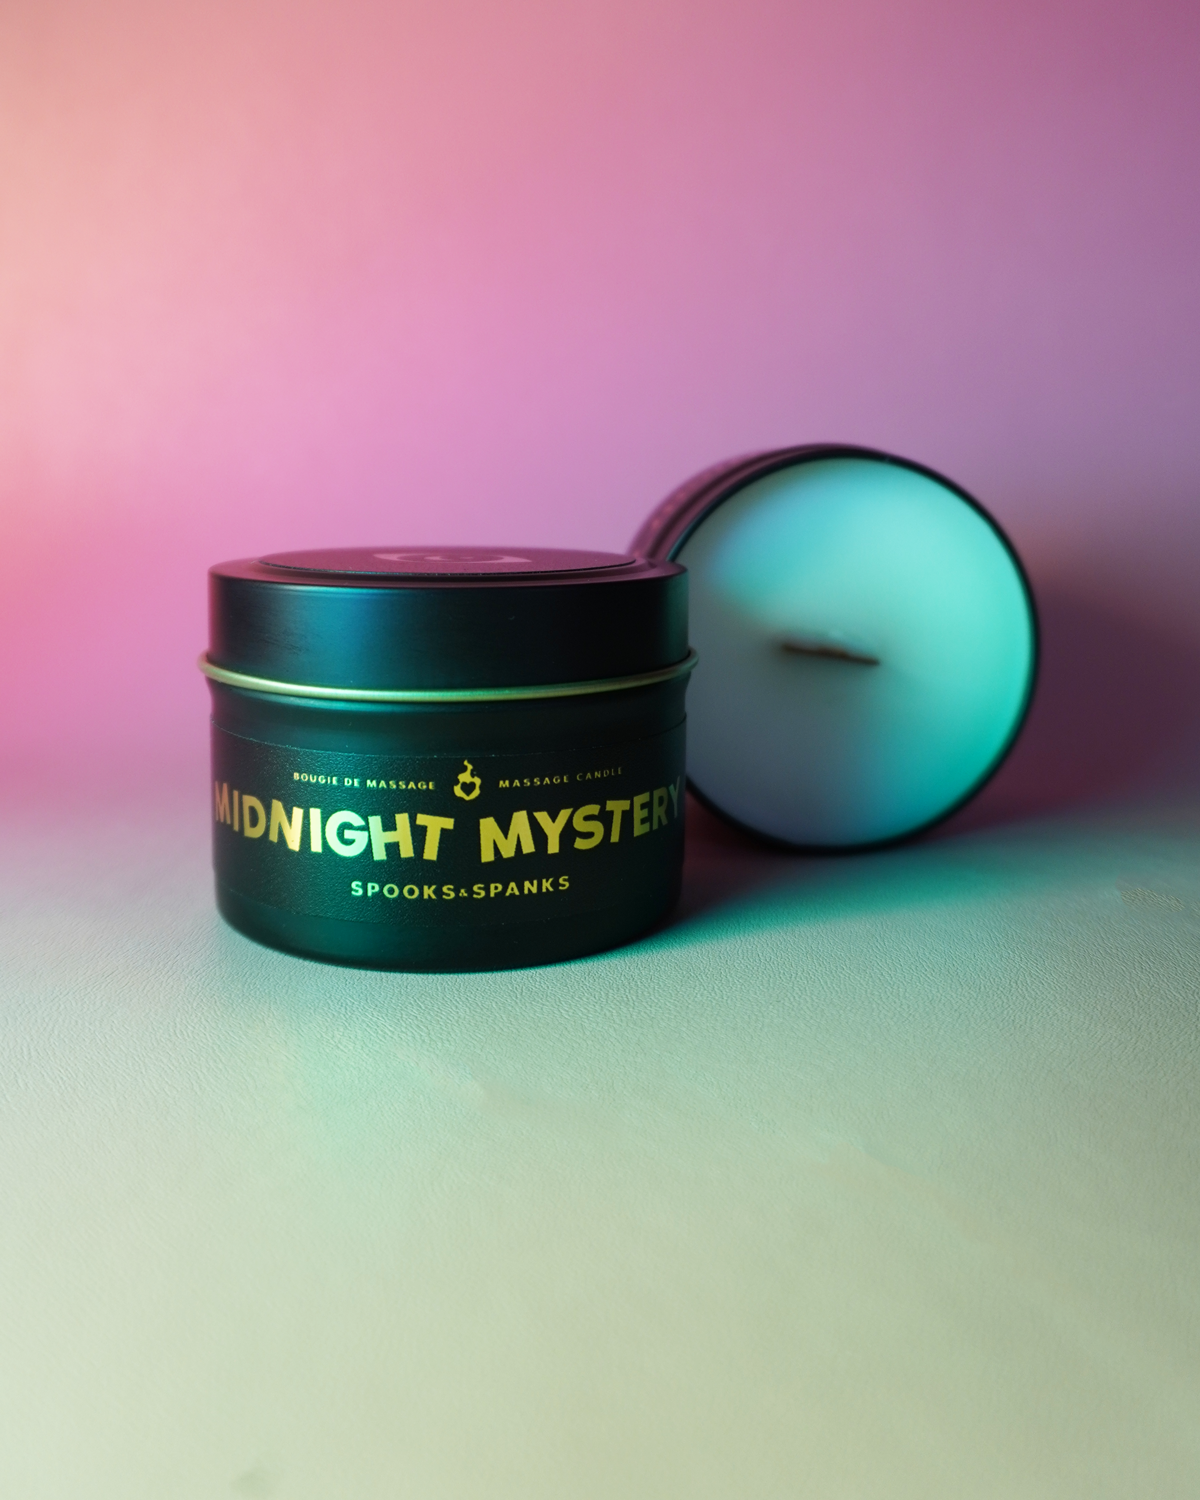 Midnight Mystery white peach + ylang-ylang + champagne massage candle